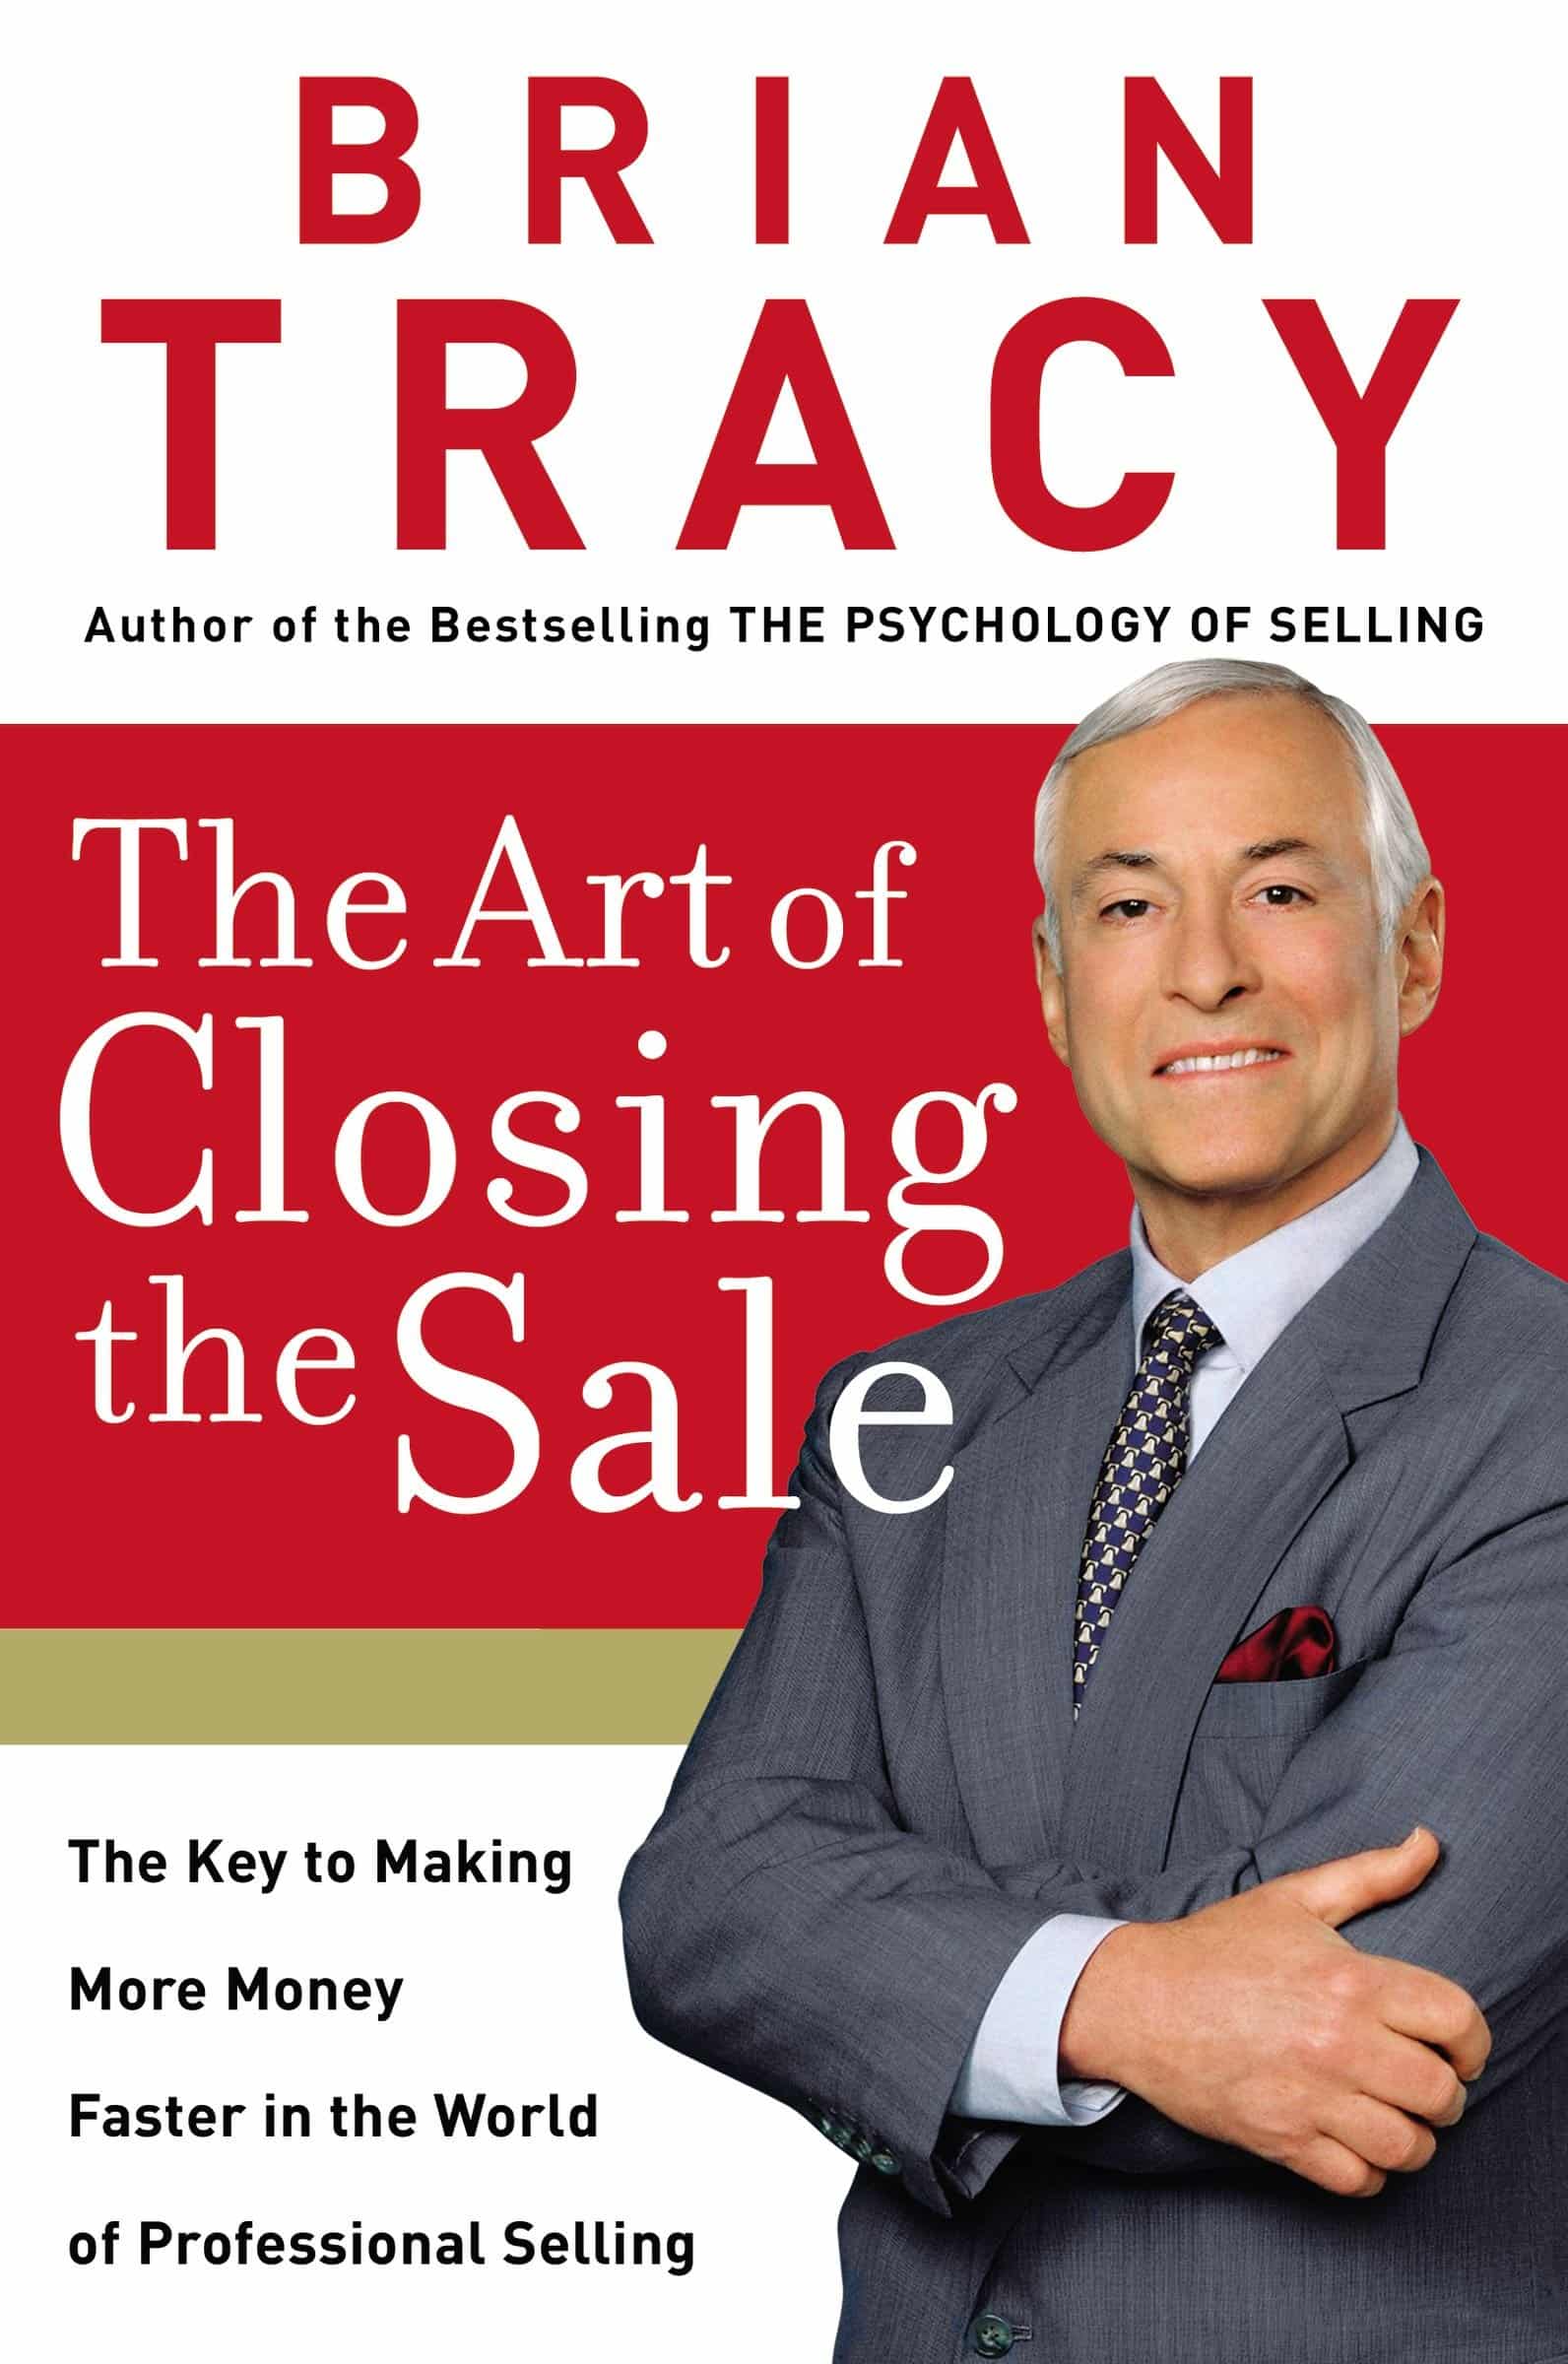 The Art of Closing the Sale by Brian Tracy book cover